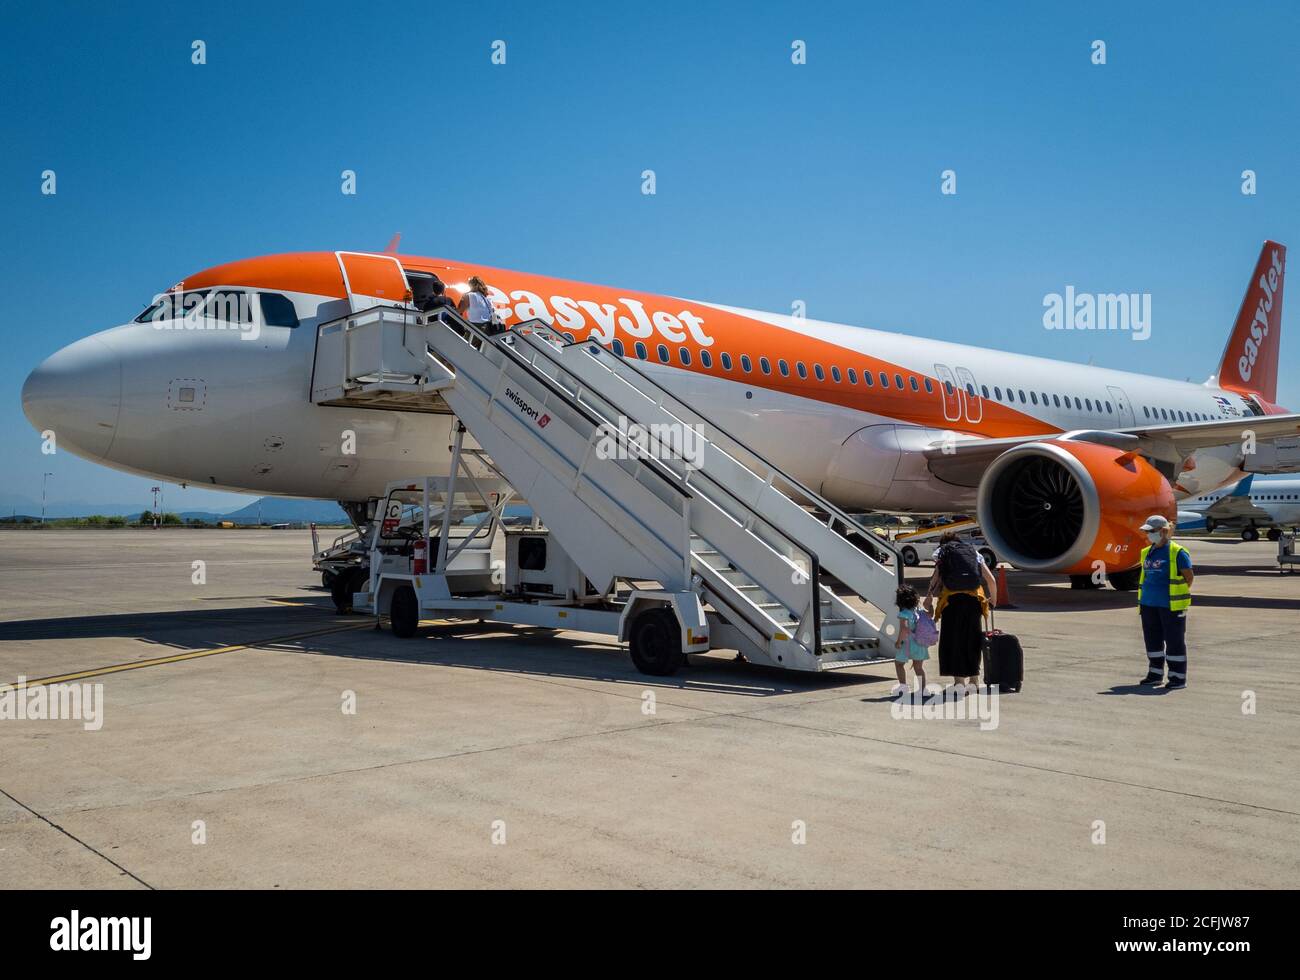 Air passengers boarding a EasyJet flight in Aktion airport. Stock Photo